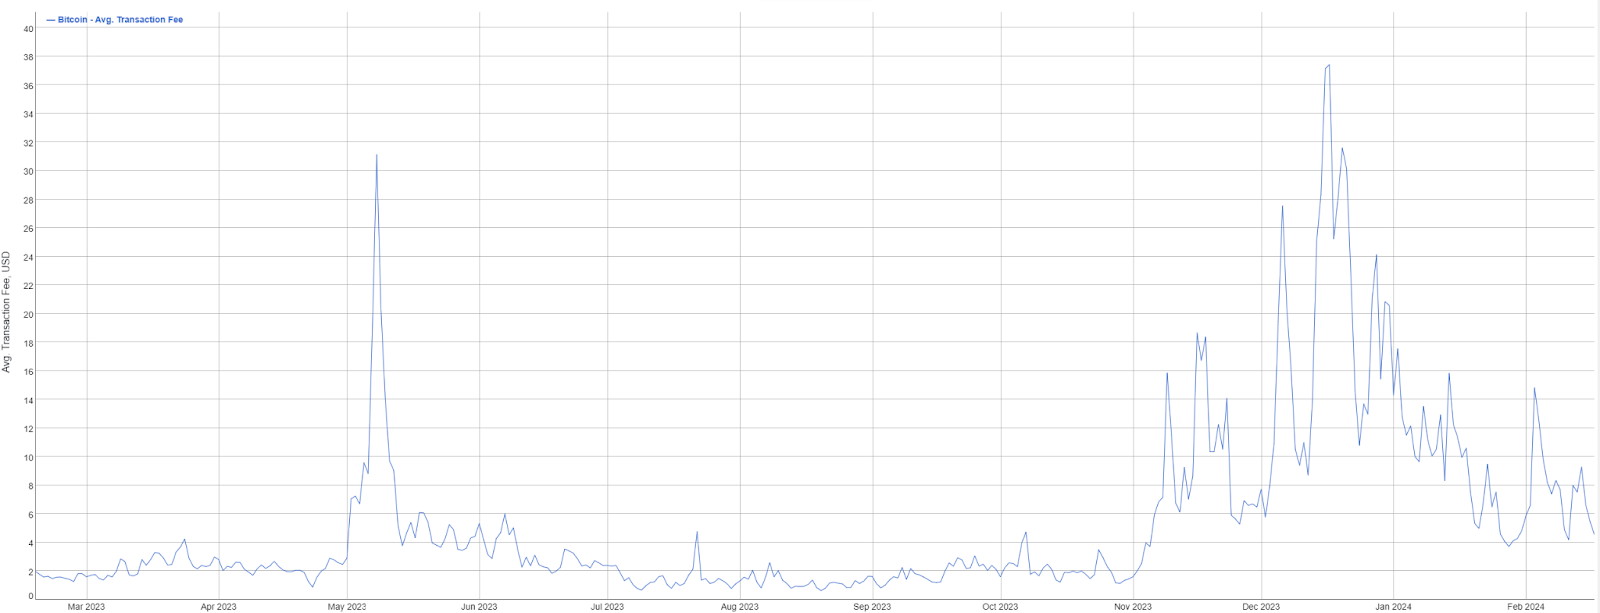 Bitcoin Average Transaction Fees Over the Years. 